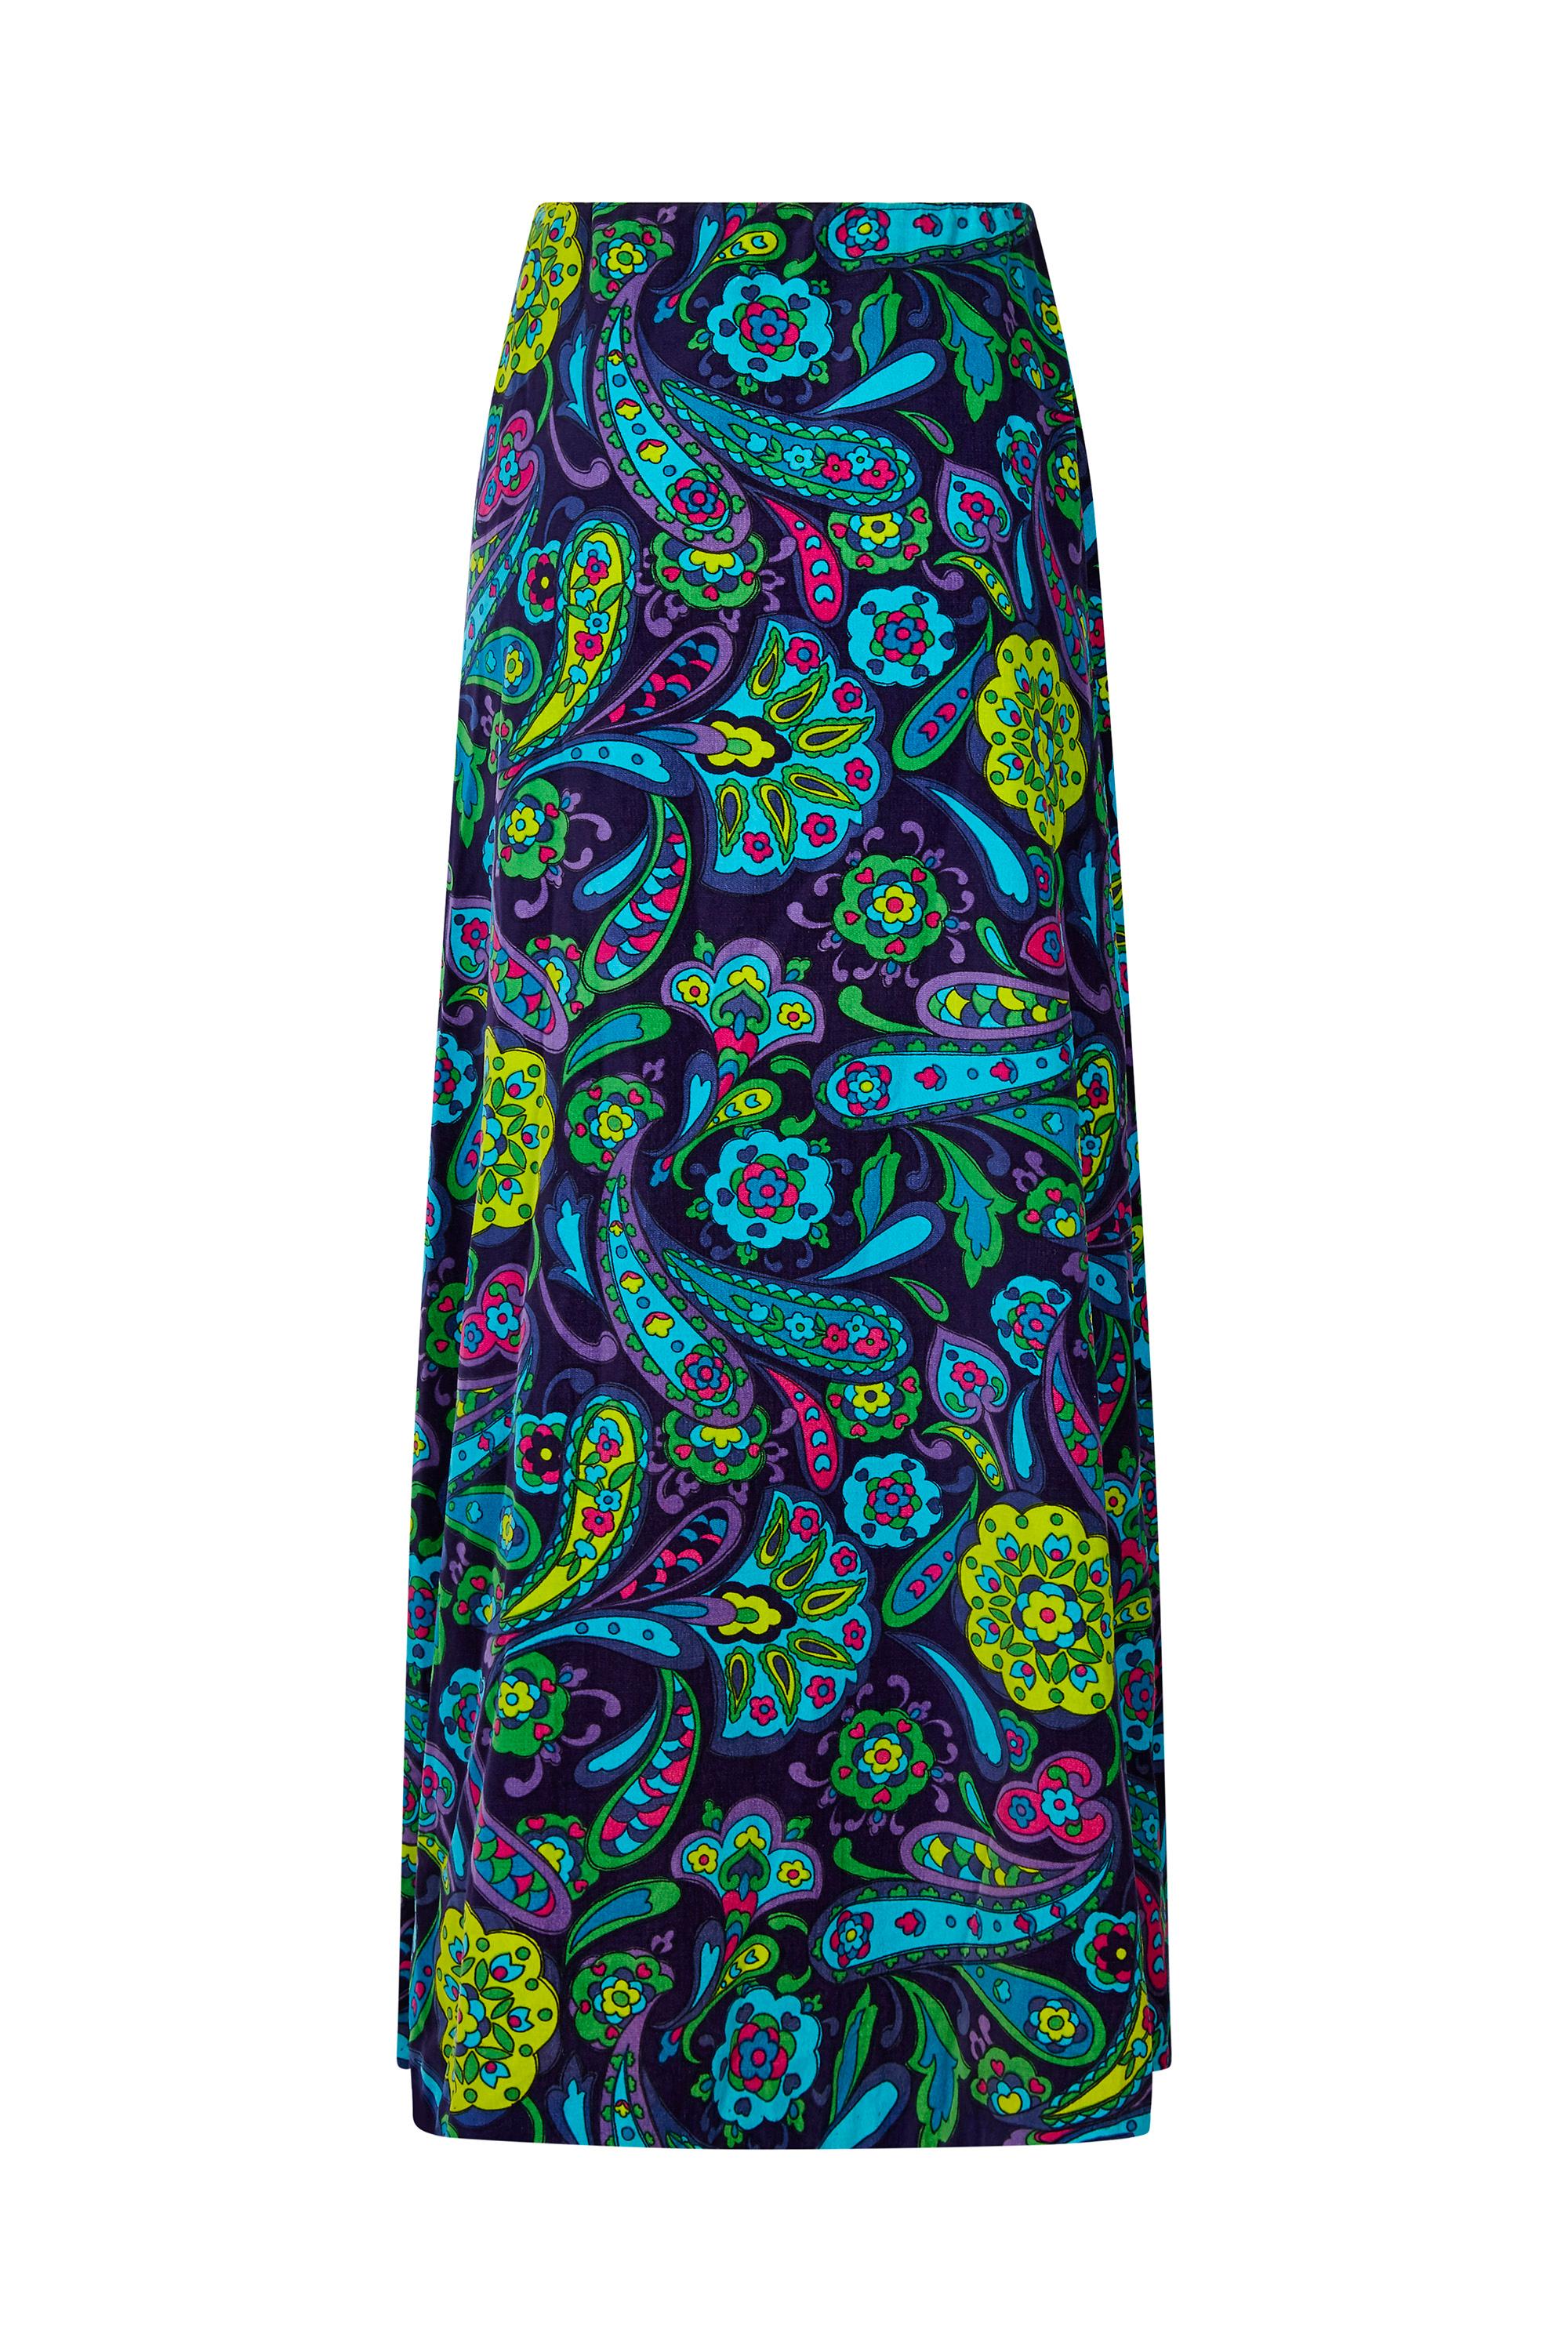 1960s Psychedelic Paisley Print Velvet Maxi Skirt and Top Ensemble For Sale 4